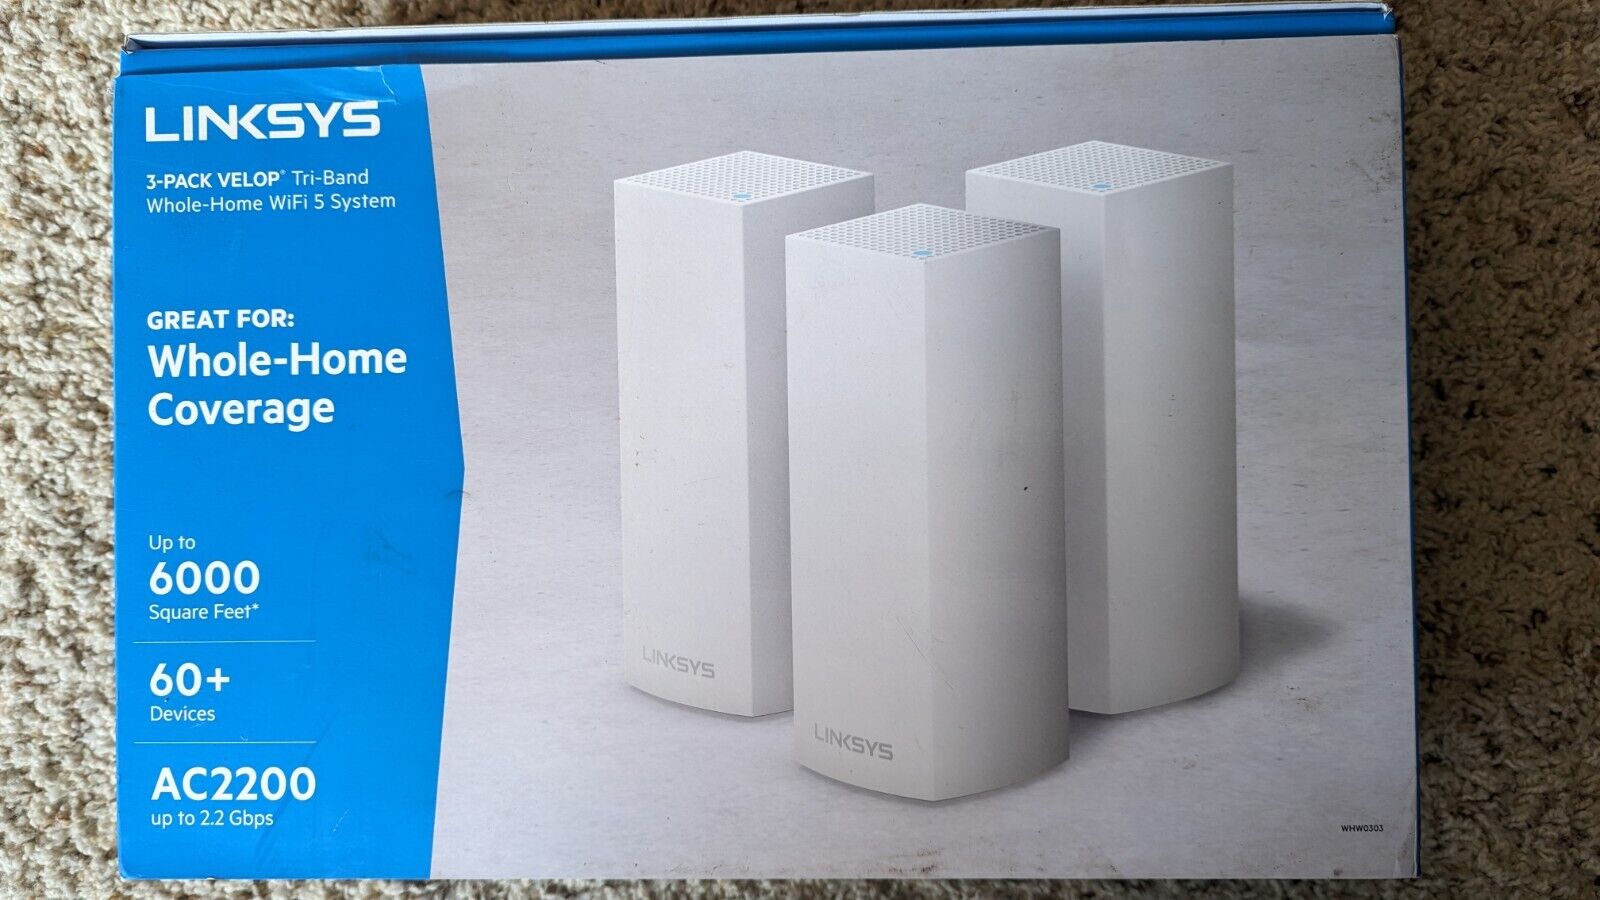 Linksys 3-Pack Velop Tri-Band Whole-Home Wi-Fi 5 System AC2200 WHW0303 White